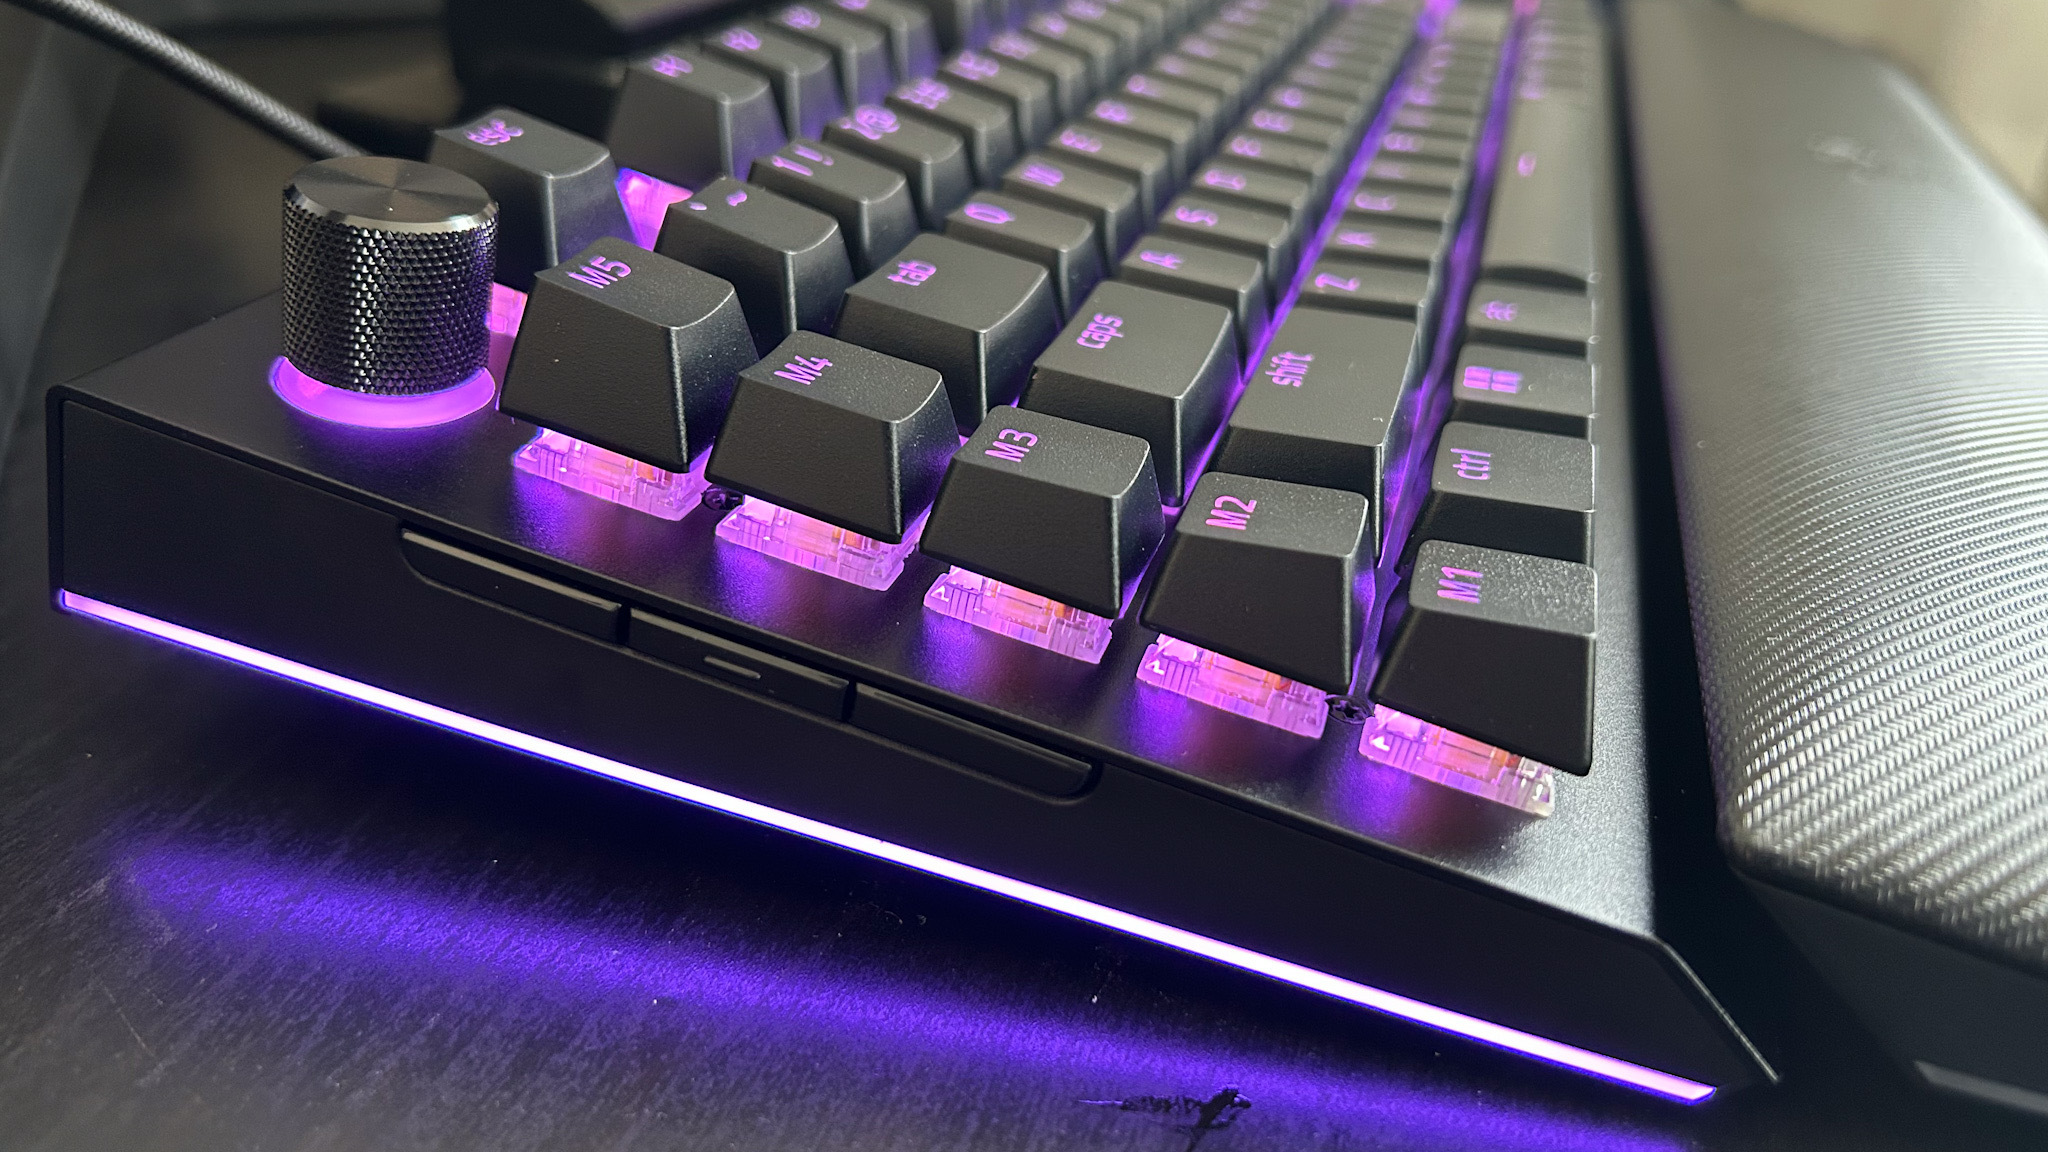 Razer BlackWidow V4 Pro review: This keyboard has everything